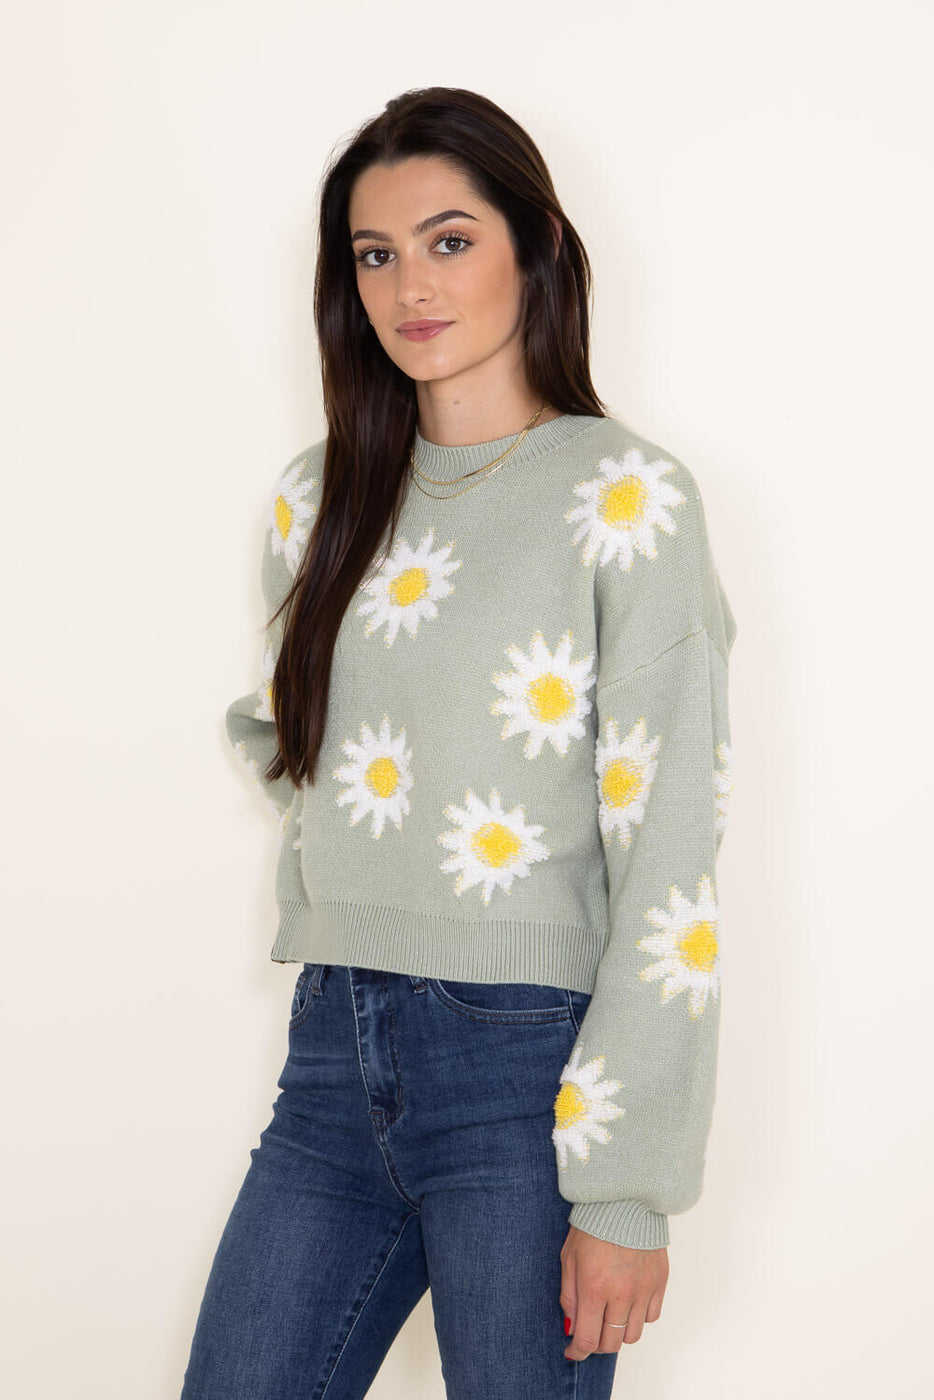 Simply Southern Daisy Print Cropped Sweater for Women in Green